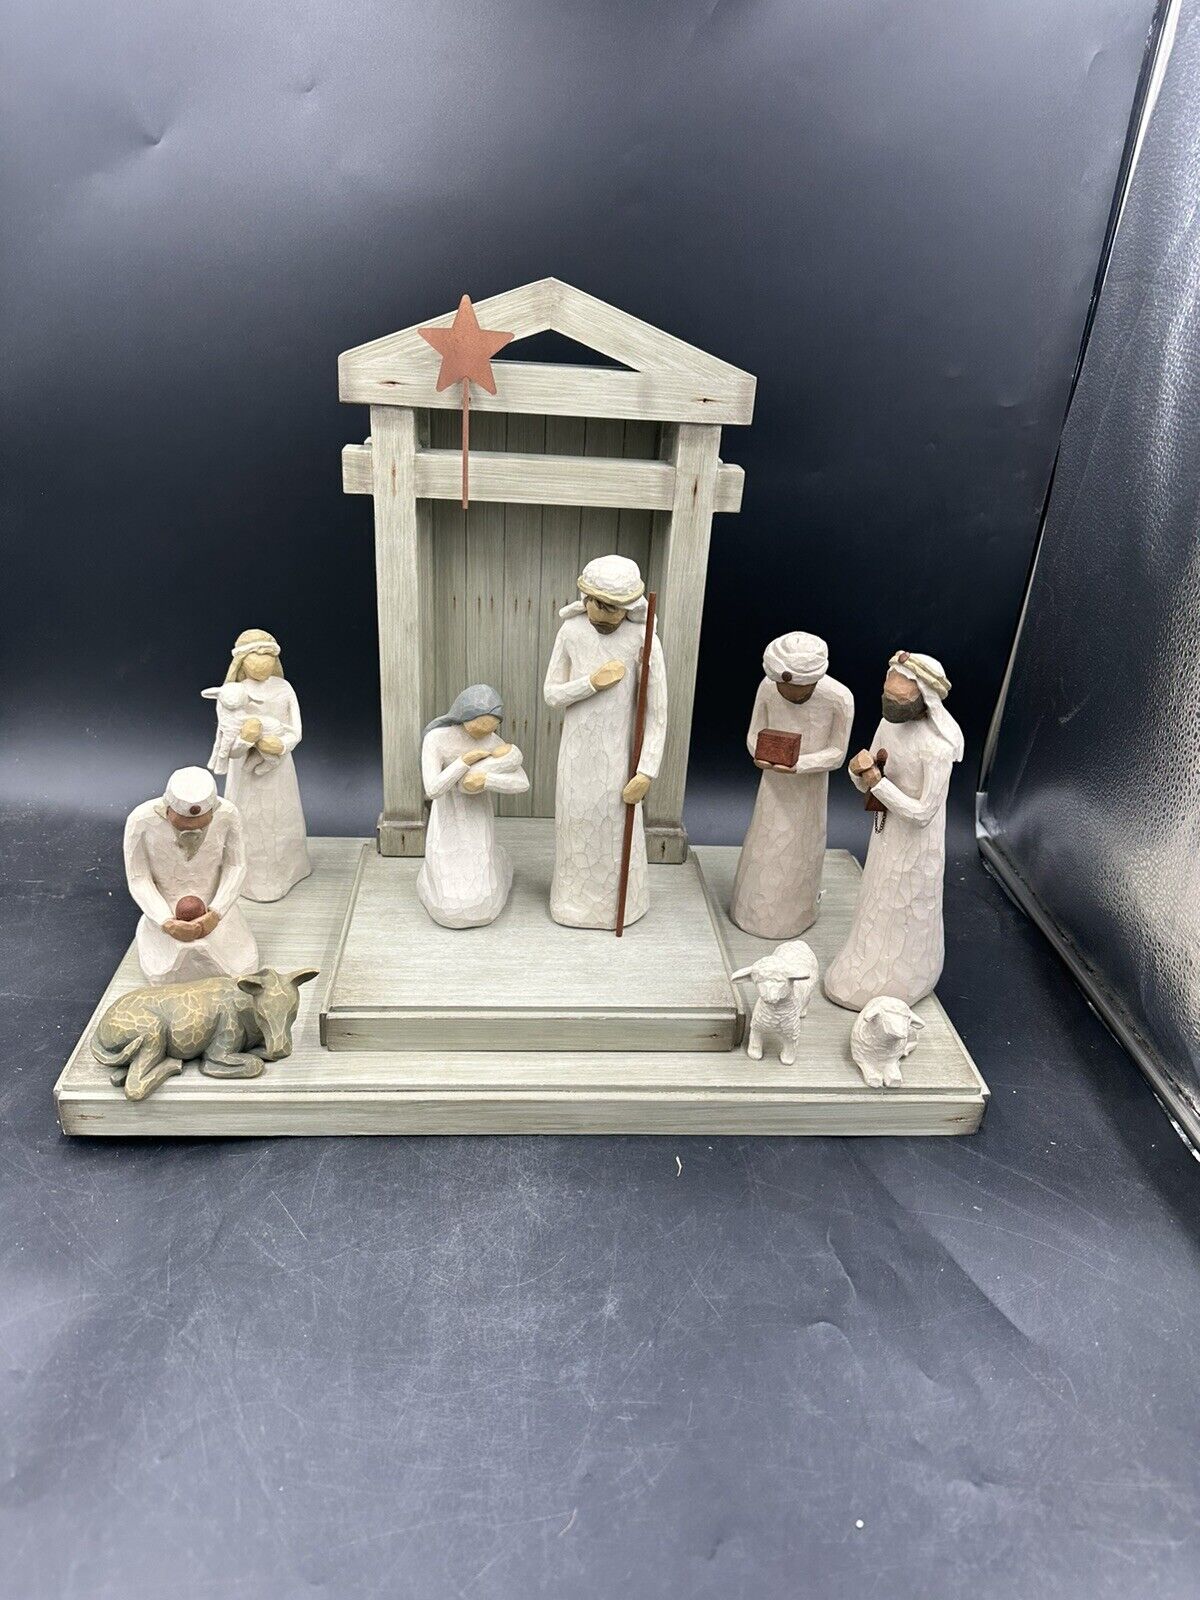 DEMDACO Willow Tree 26005,26106,26027 Nativity Hand Painted Sculpted Figures 9pc